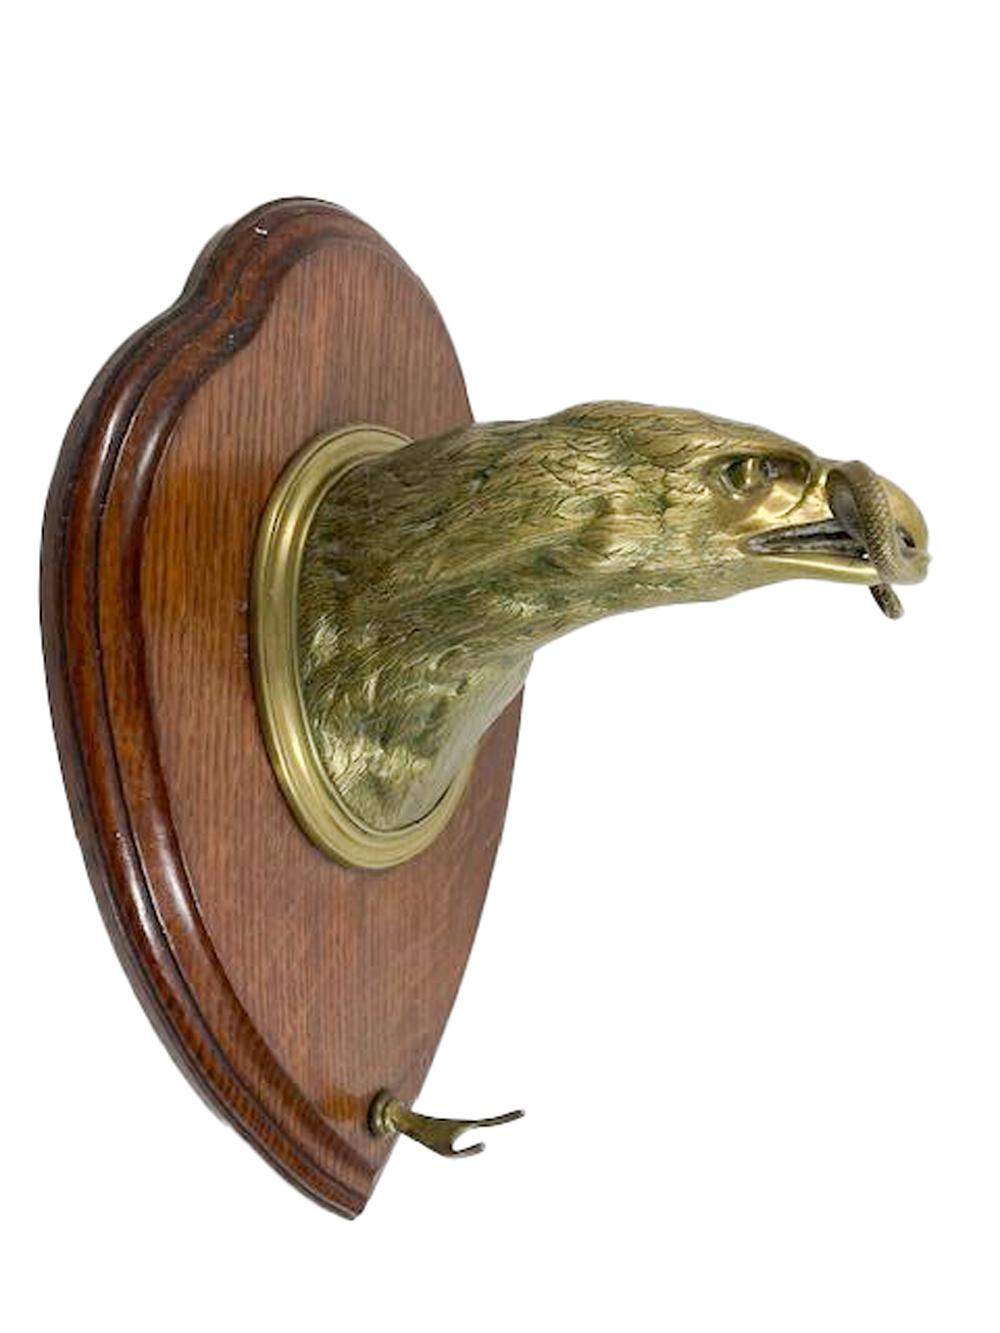 Wall Mounted Brass Eagle Head on Oak Plaque Holding a Dinner Gong by Wm. Tonks For Sale 4